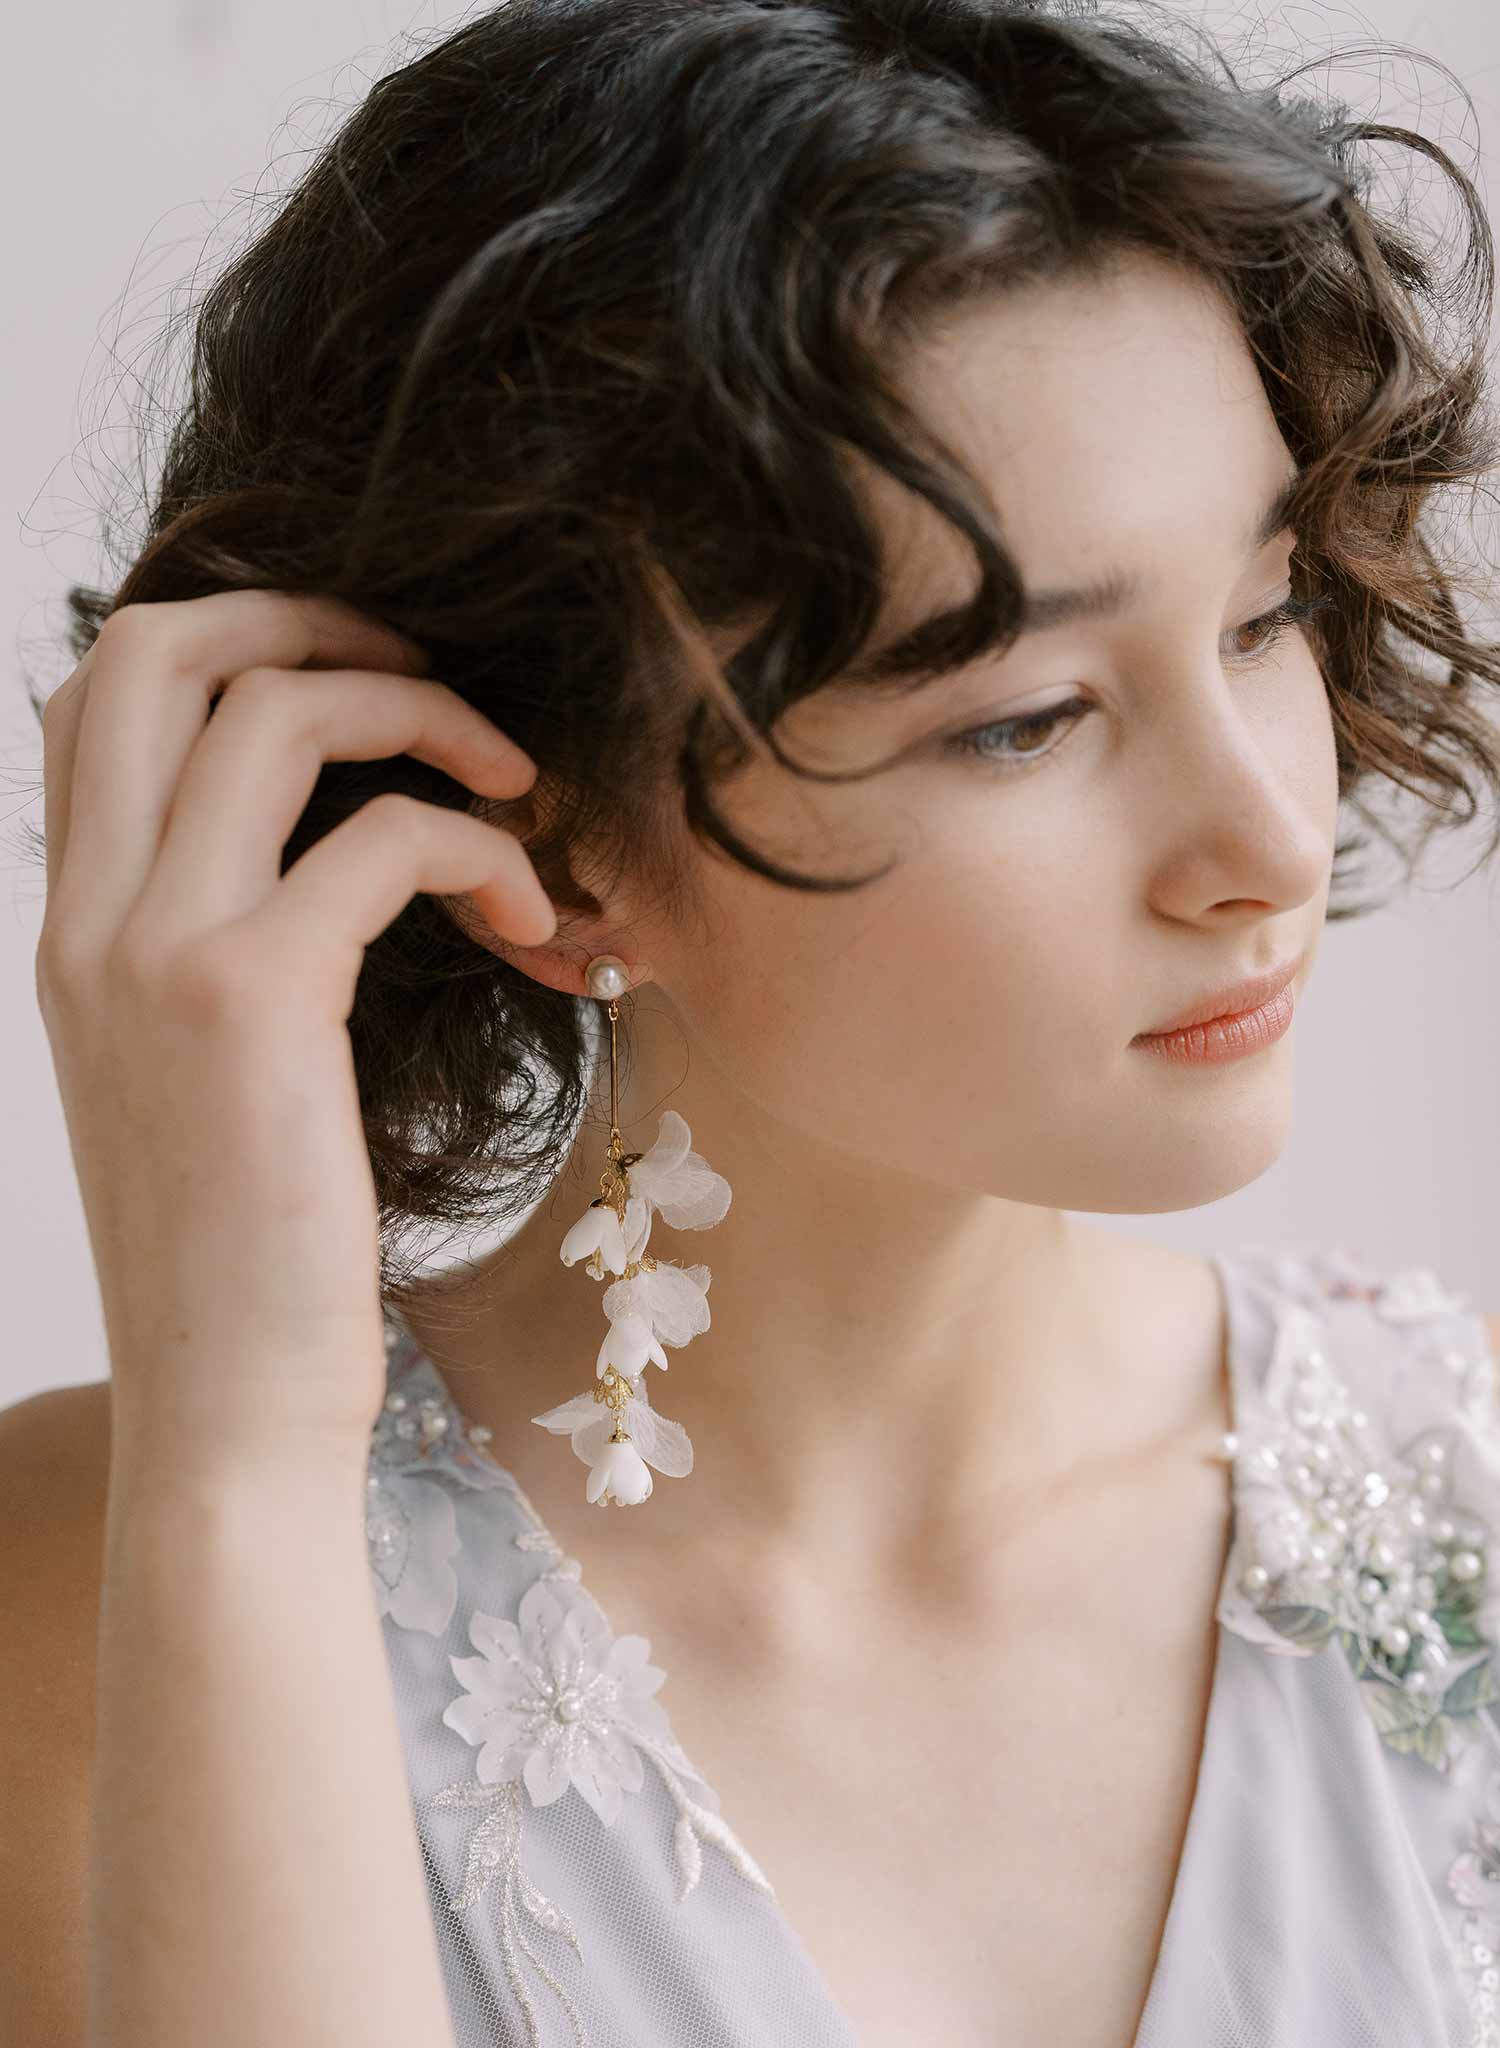 Blossom and silk dangling earrings - Style #2306